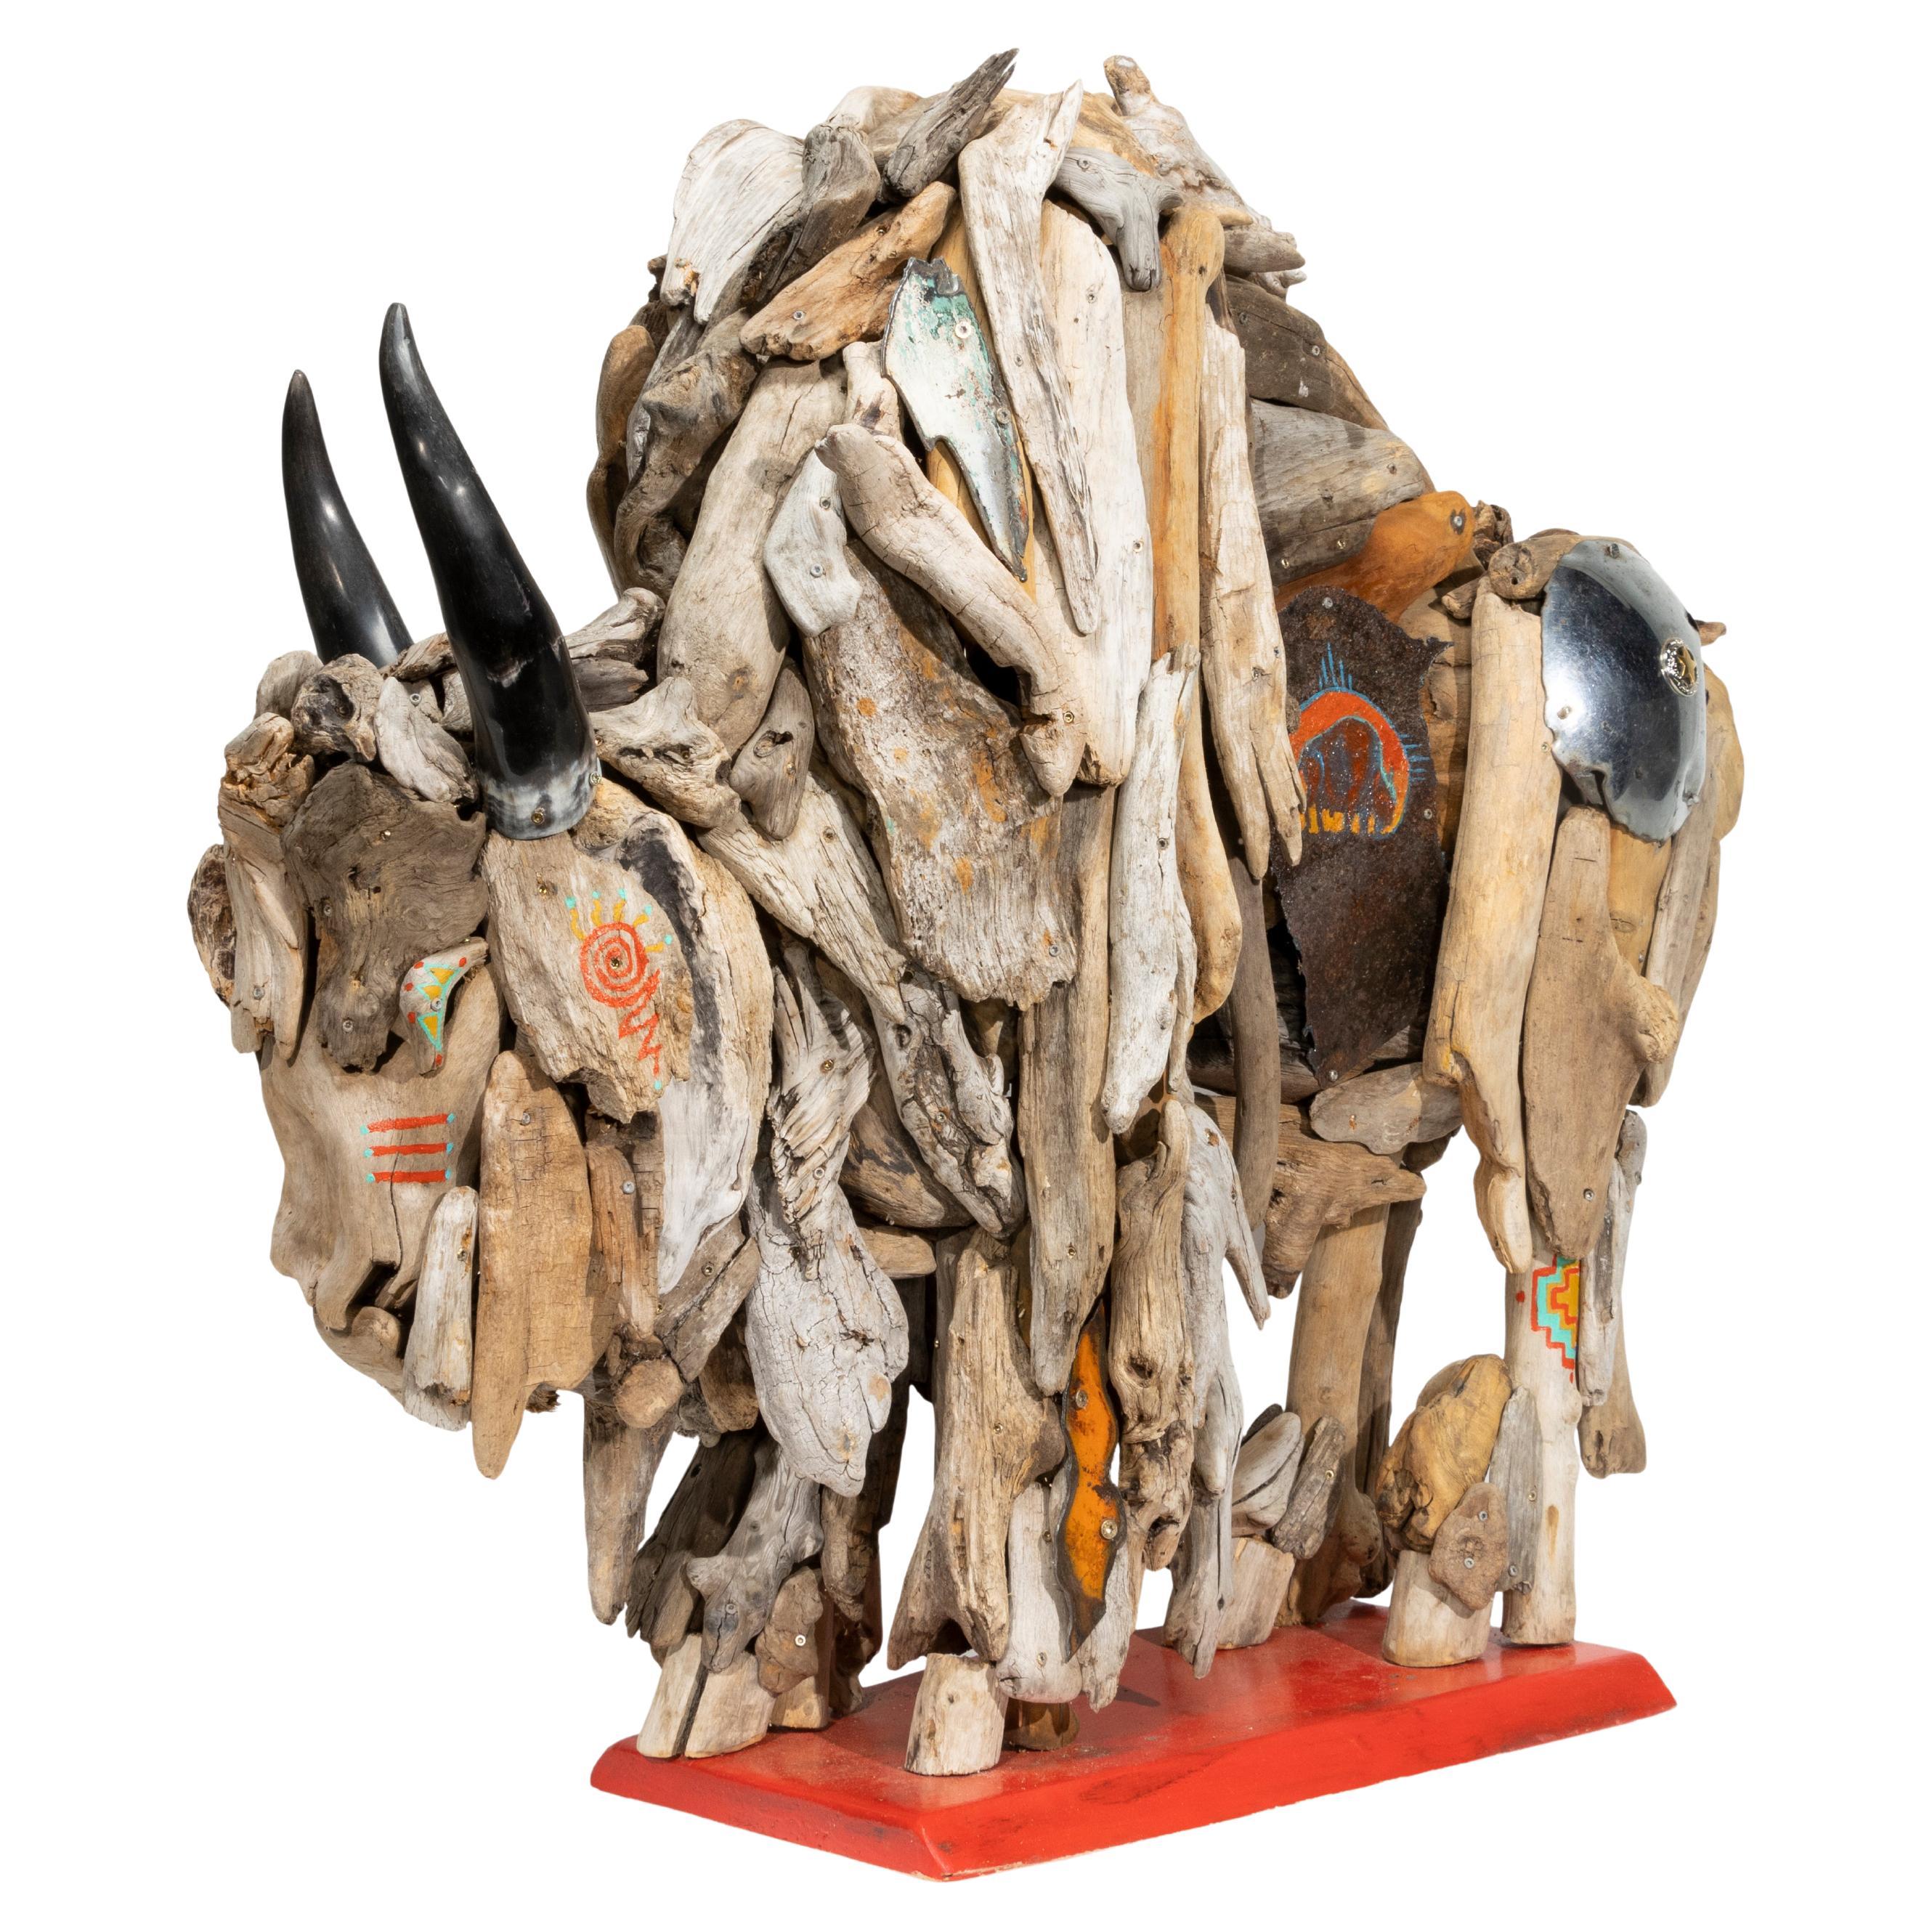 Driftwood Buffalo "Morning Thunder" Sculpture by Tina Milsavljevich For Sale